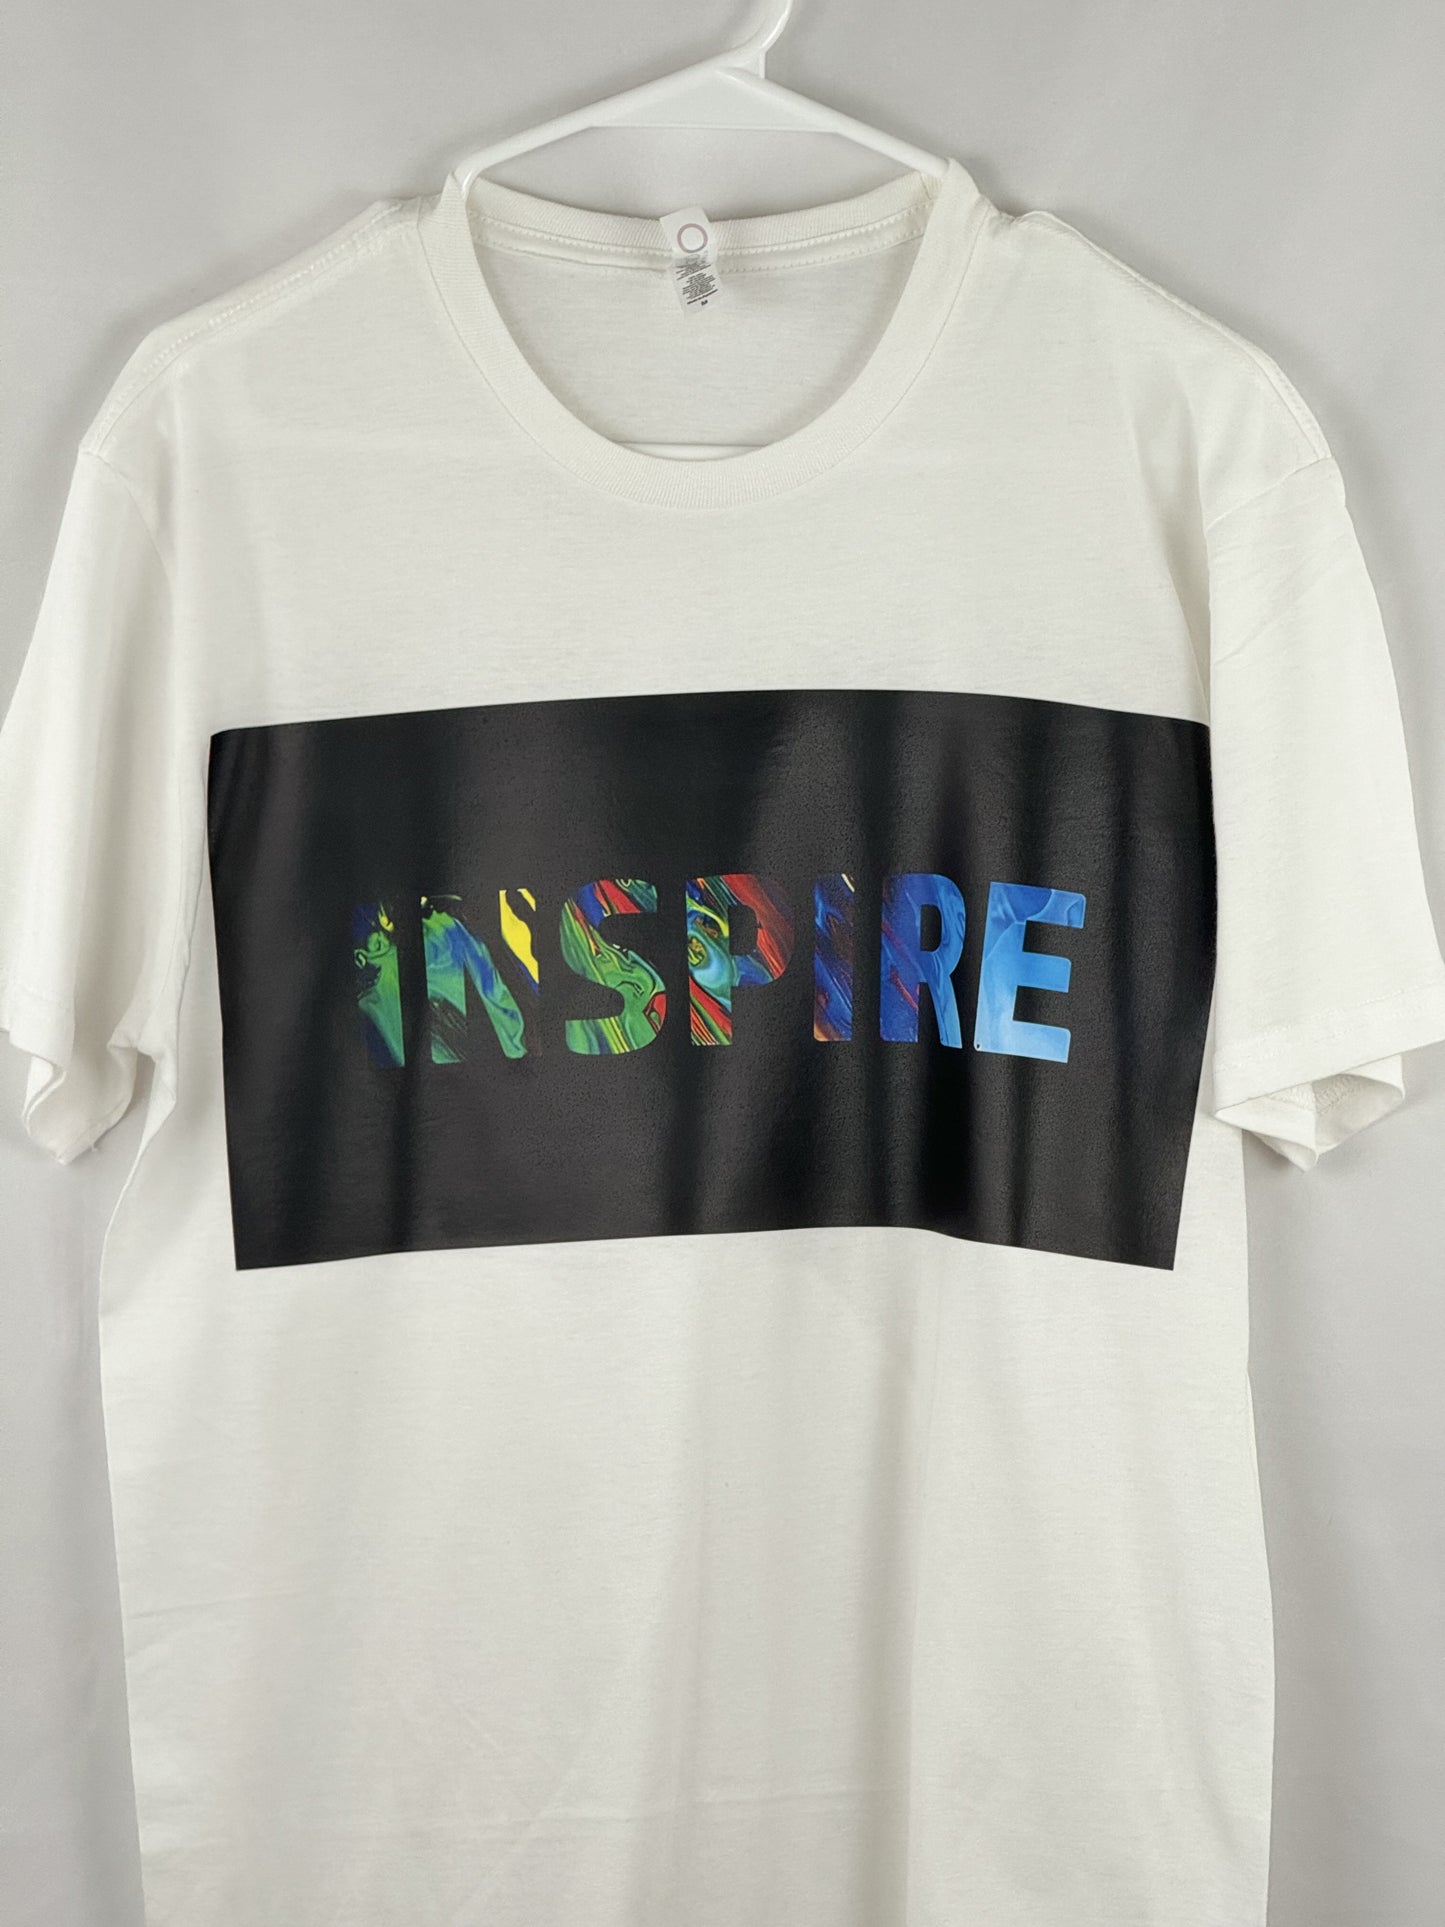 "INSPIRE" Multi-Colored Lettering Tee - Make a Statement with AdRa Apparel